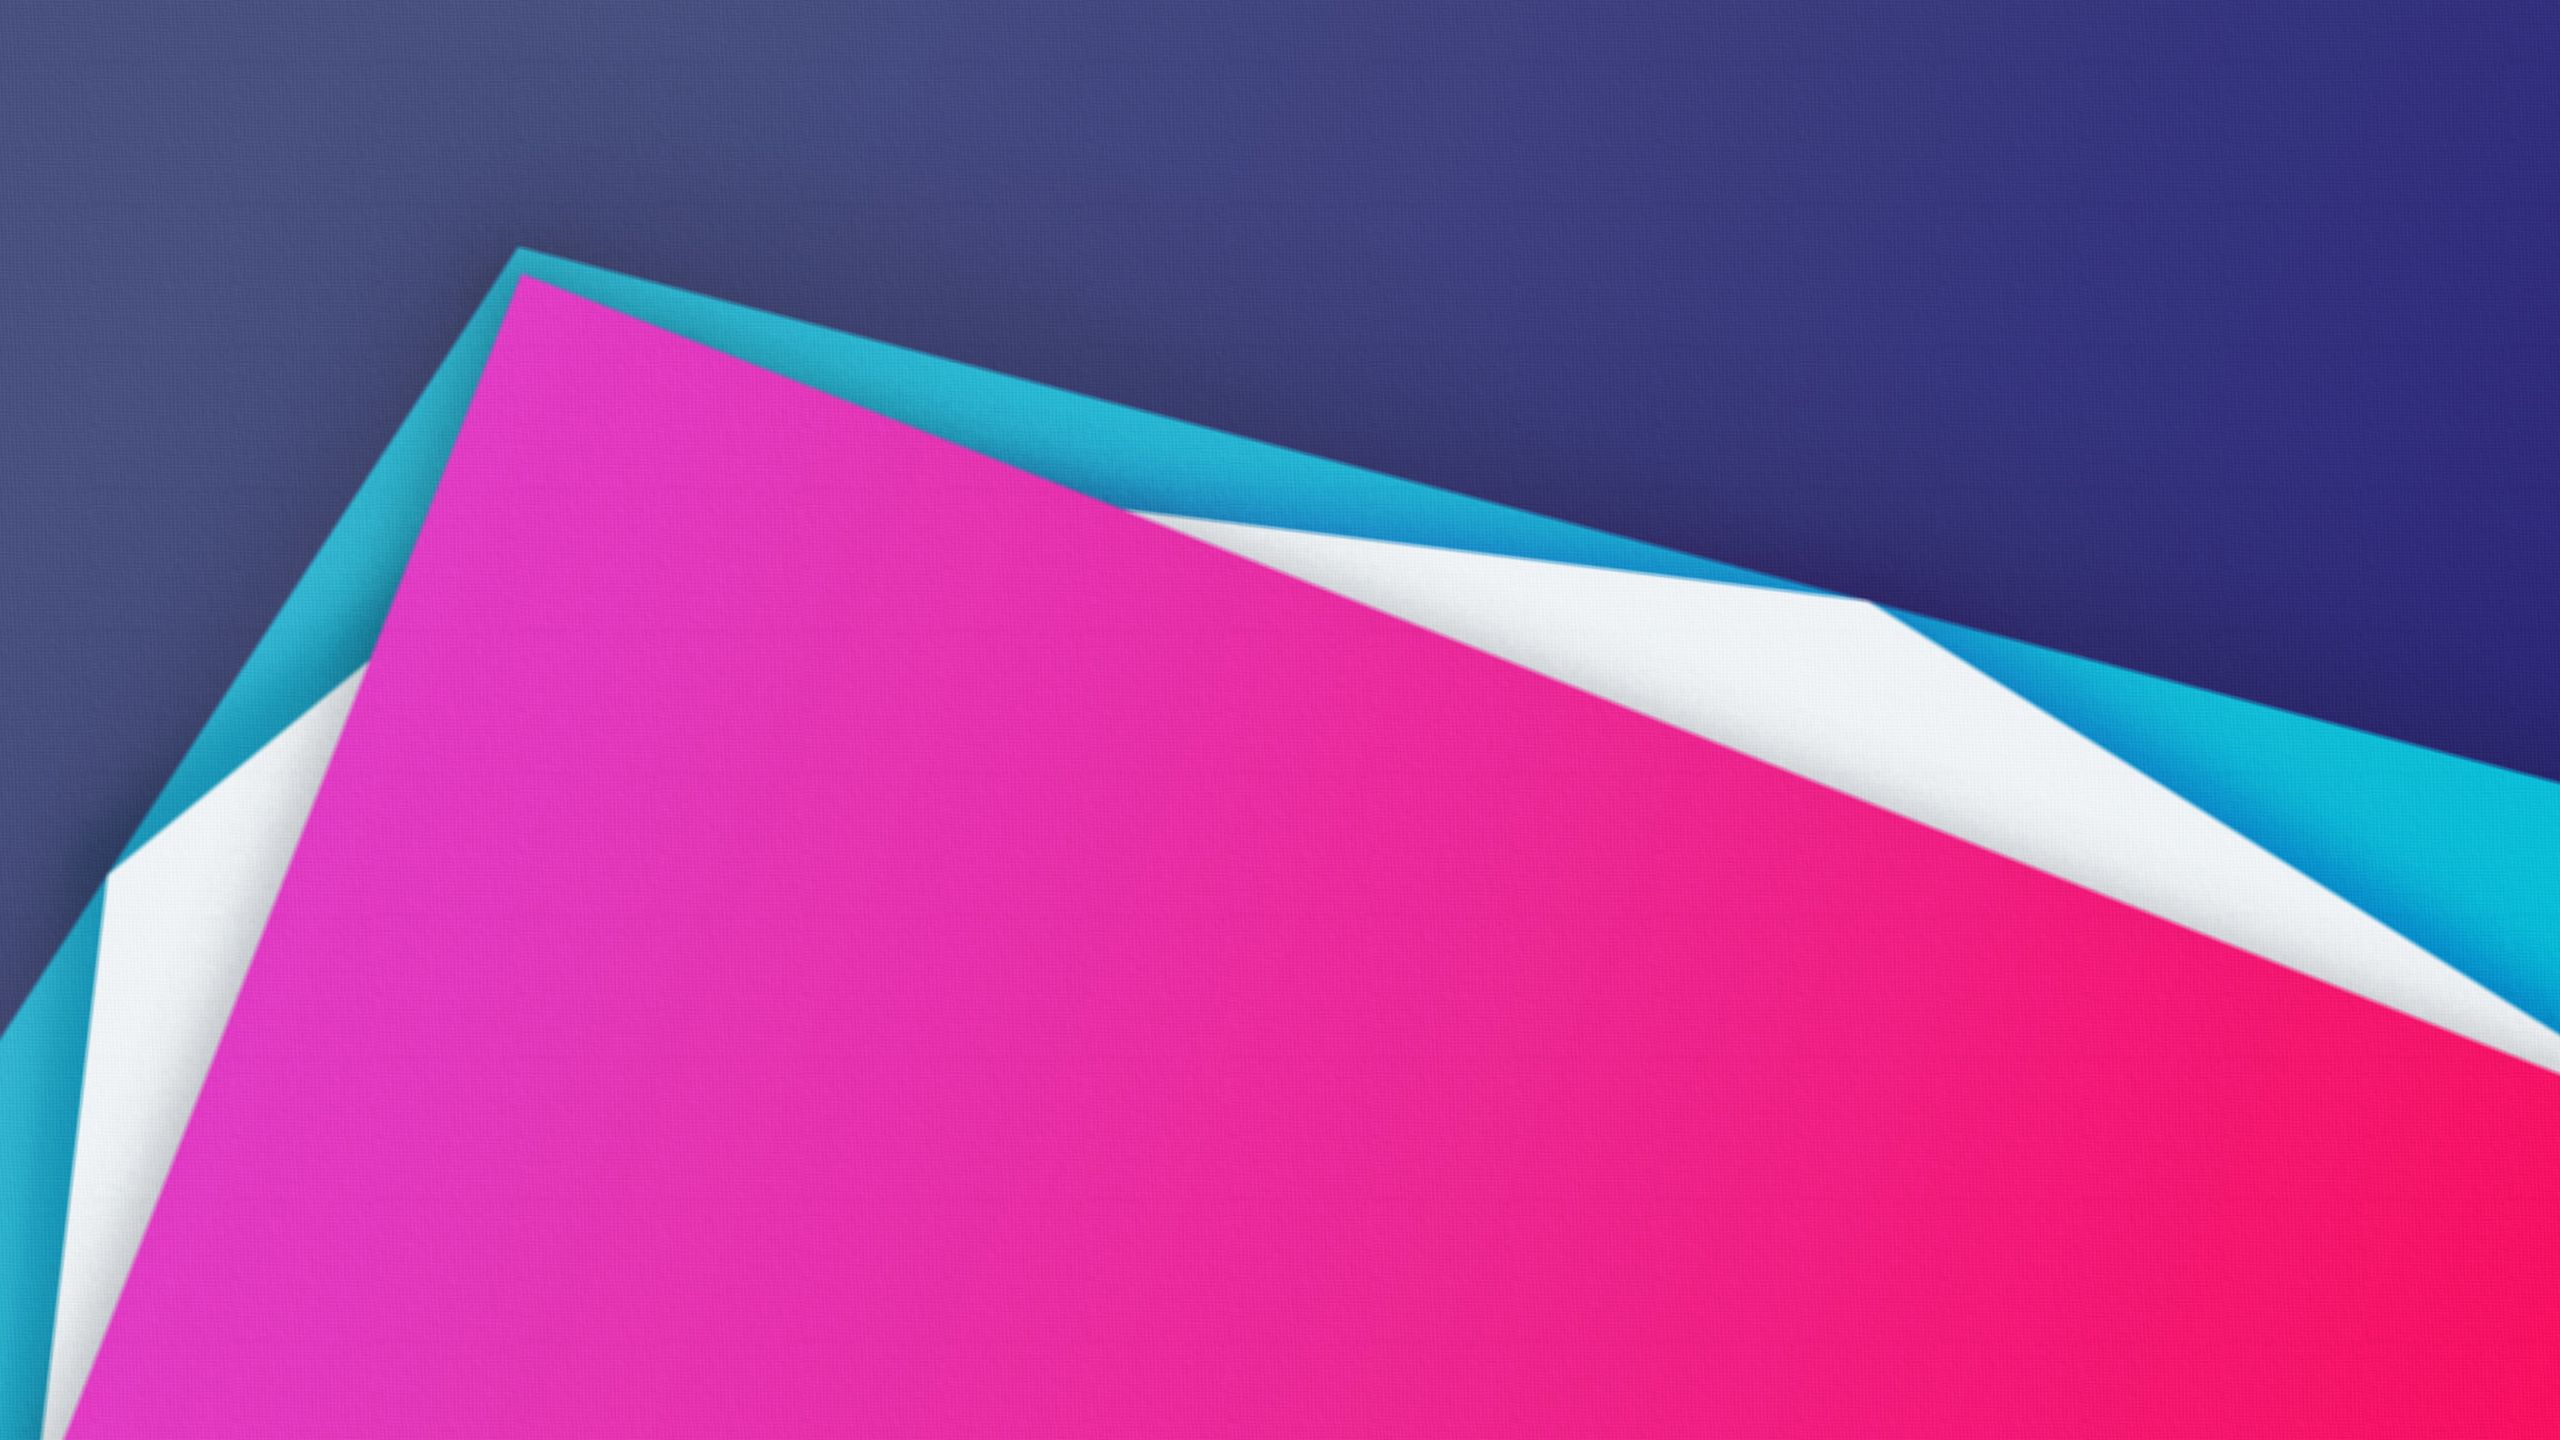 Geometry, Minimalist, Colorful wallpaper. Abstract